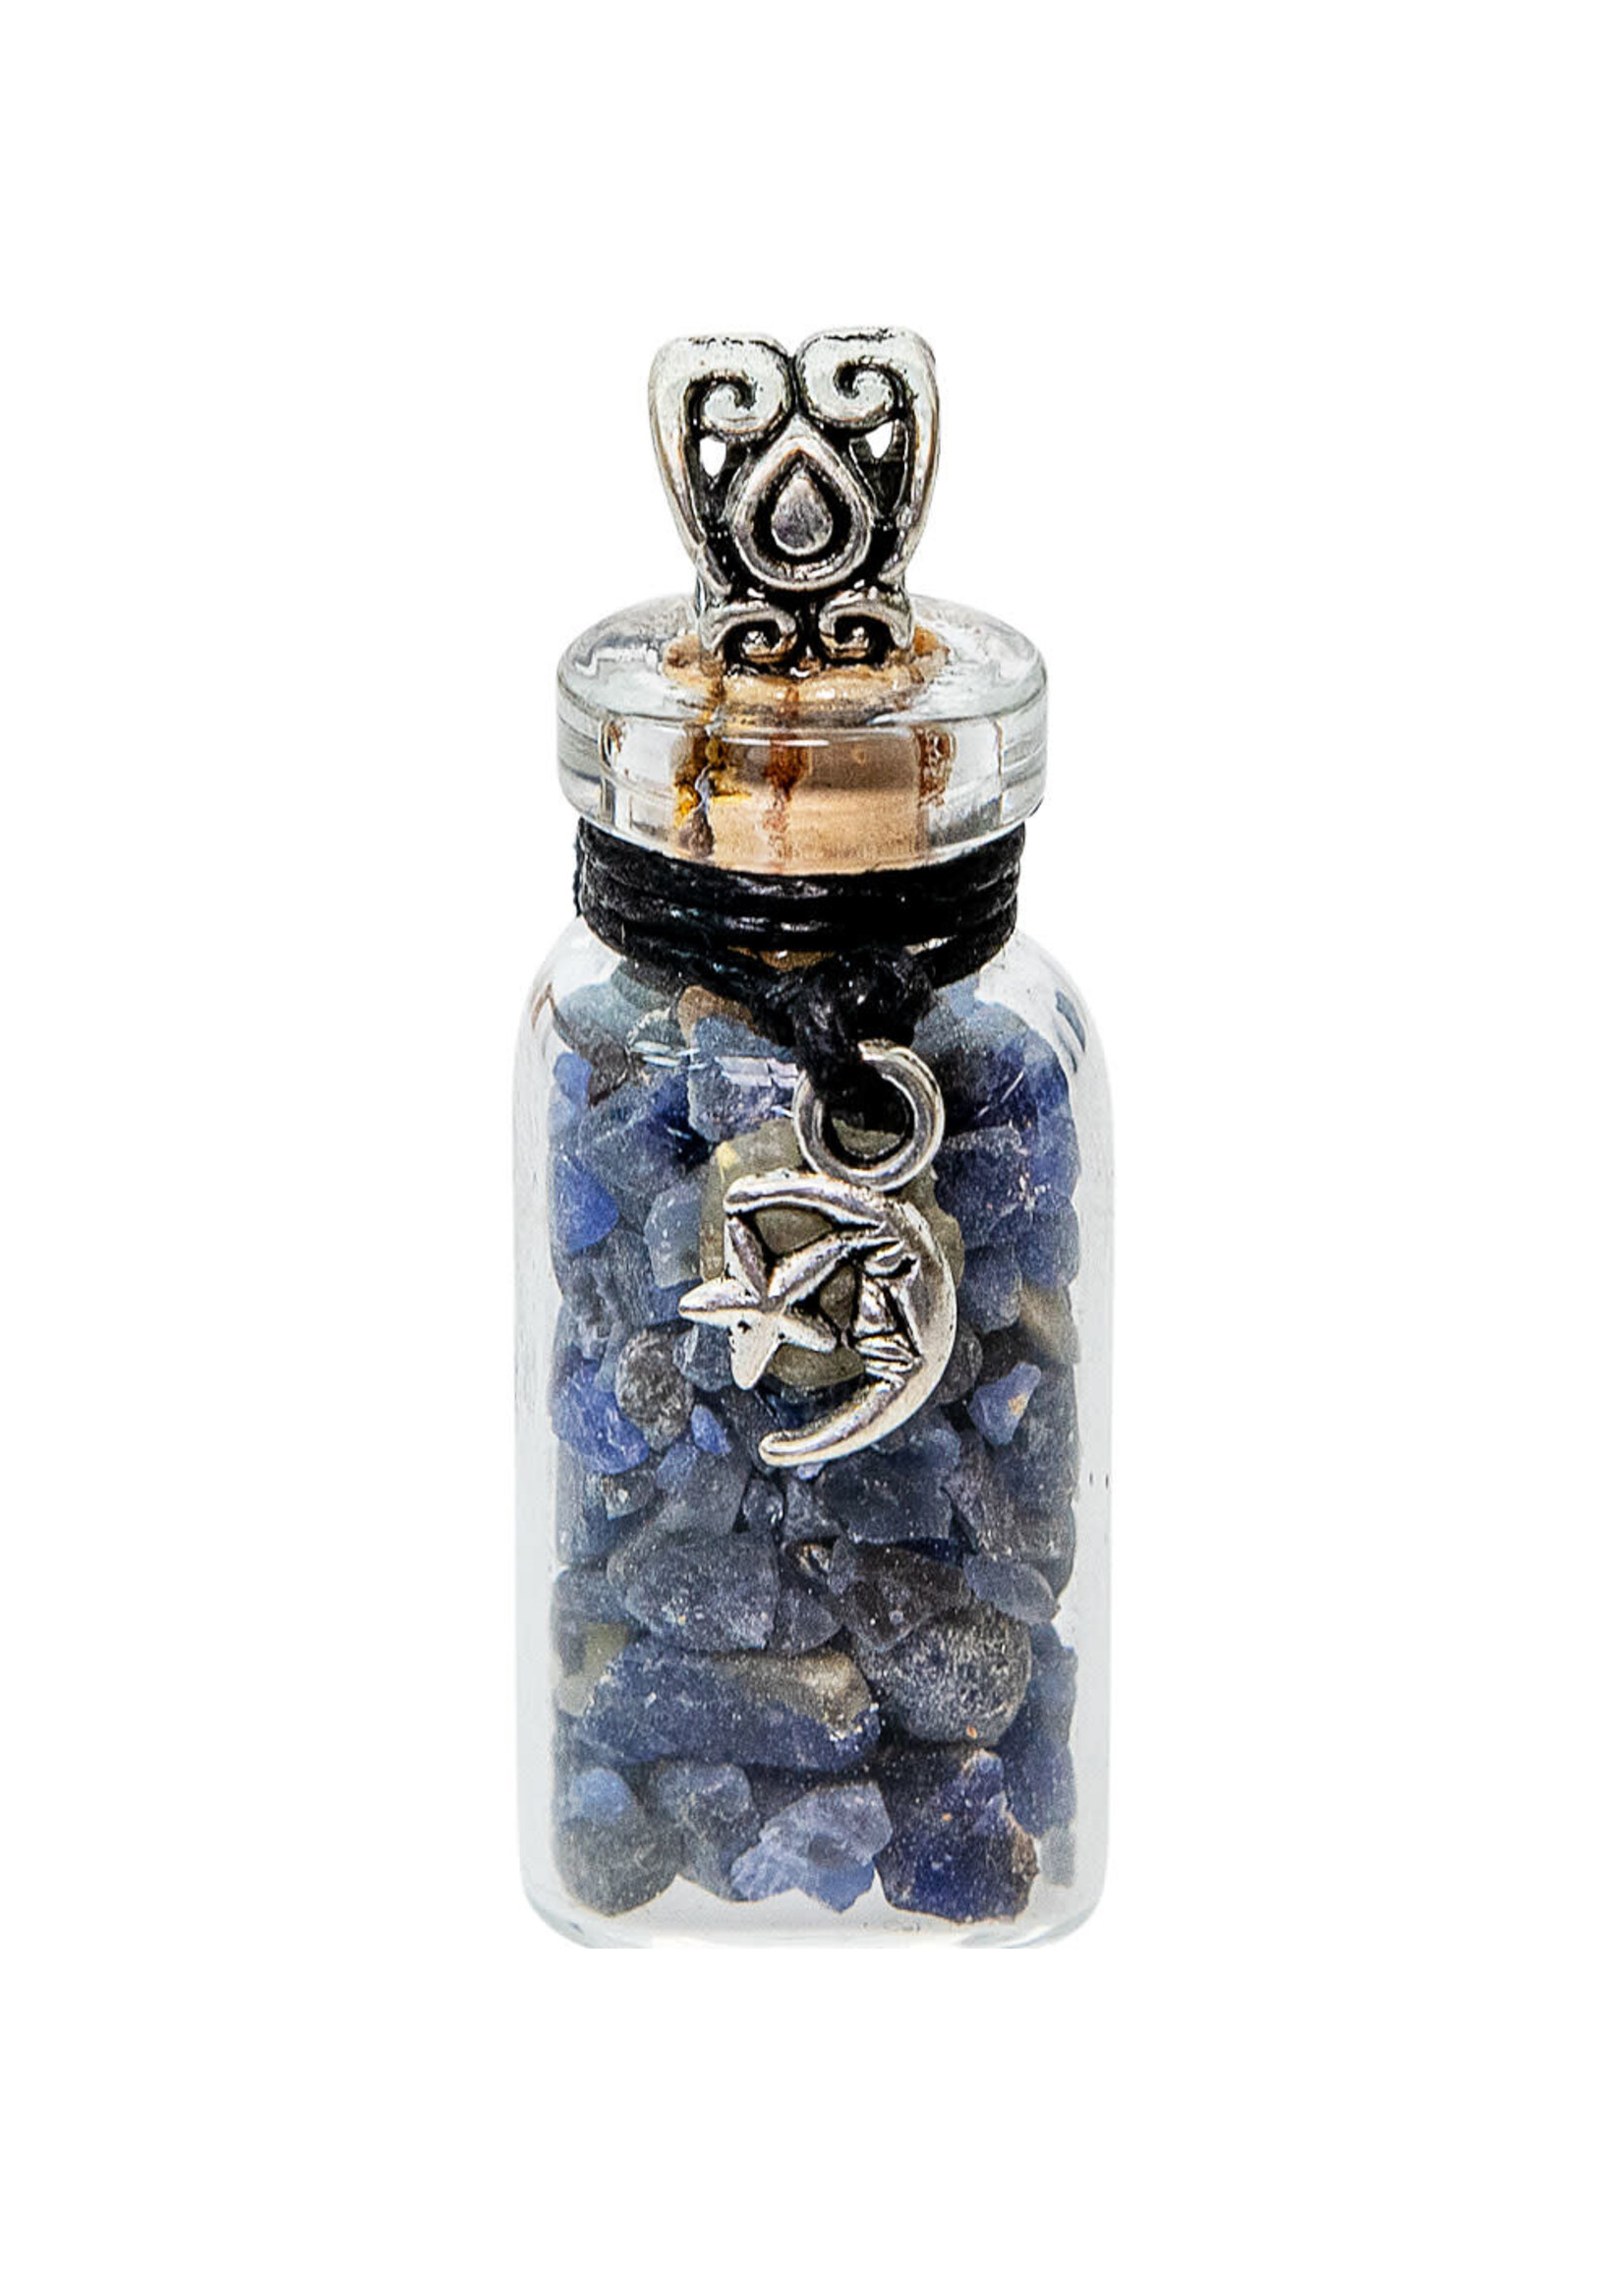 Gemstone Chip Bottle Necklace - Sodalite with Moon + Star